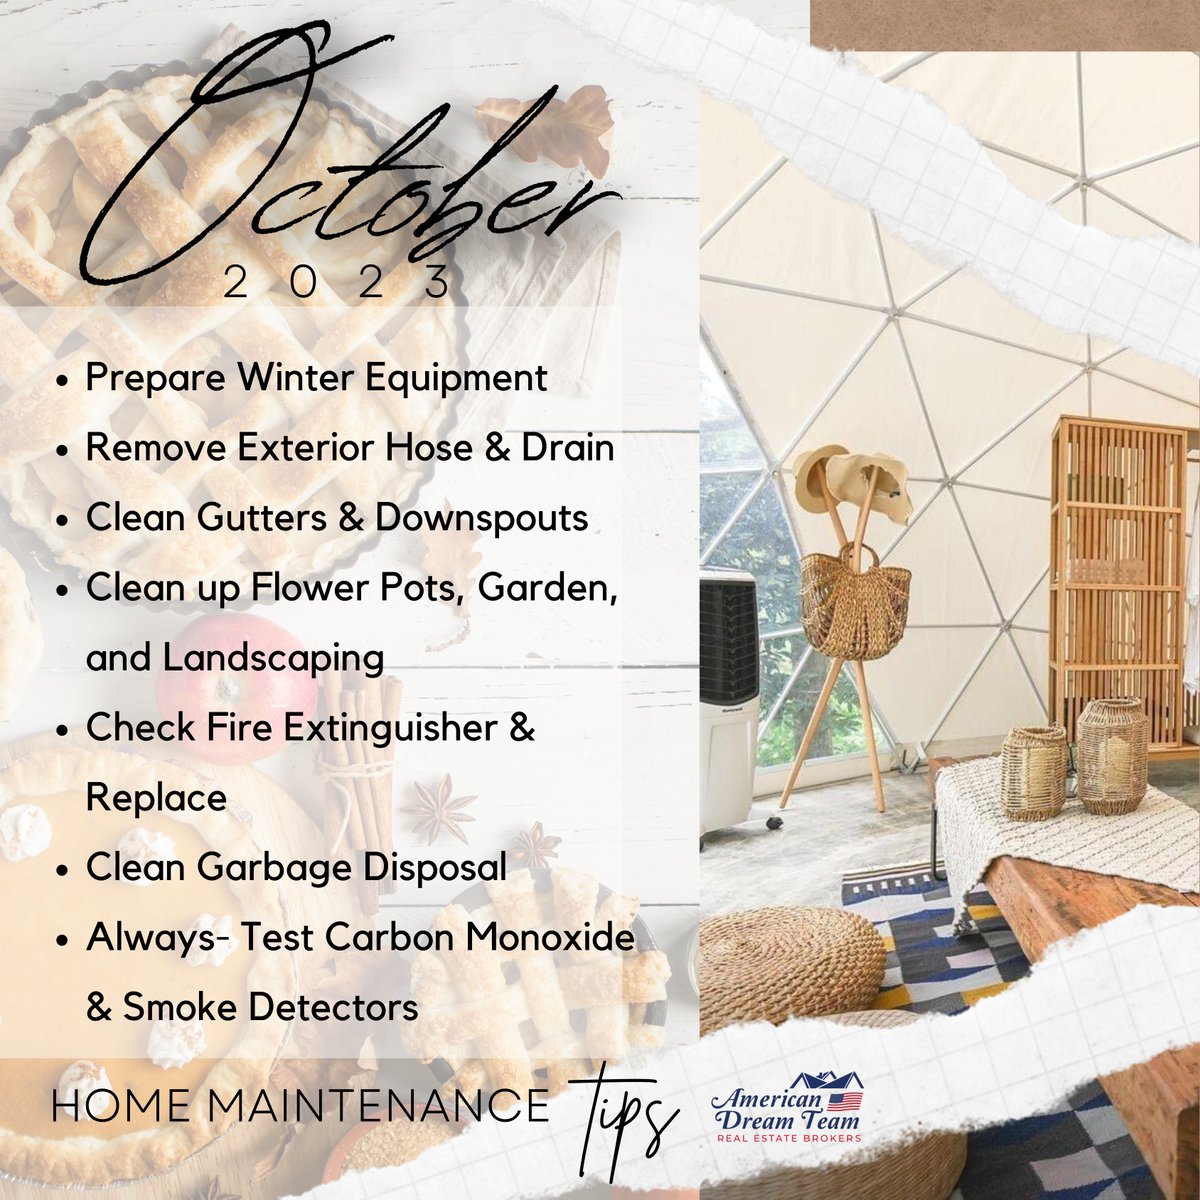 Get your home ready for the winter season with these essential for October home tips! 🏡🏠

#OctoberHomePrep #WinterReady #HomeMaintenance #HomeTips #WinterPreparation #CozyHome #SeasonalCleaning #WinterHomeCare #HomeSafety #WinterReadiness #HomePreparation #OctoberMaintenance